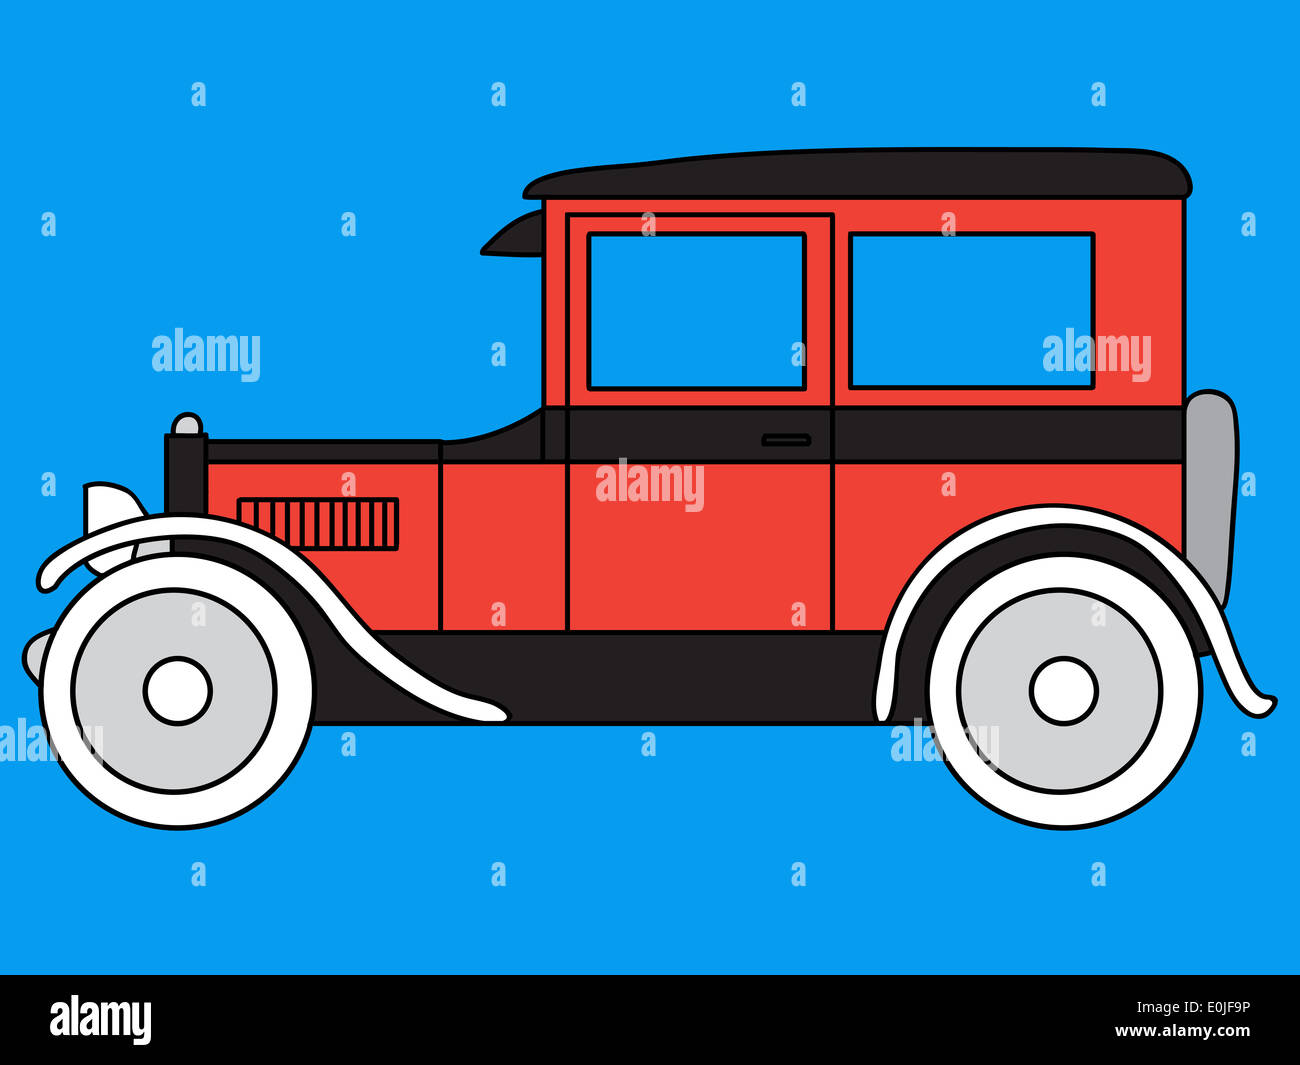 Old red car illustration Stock Photo